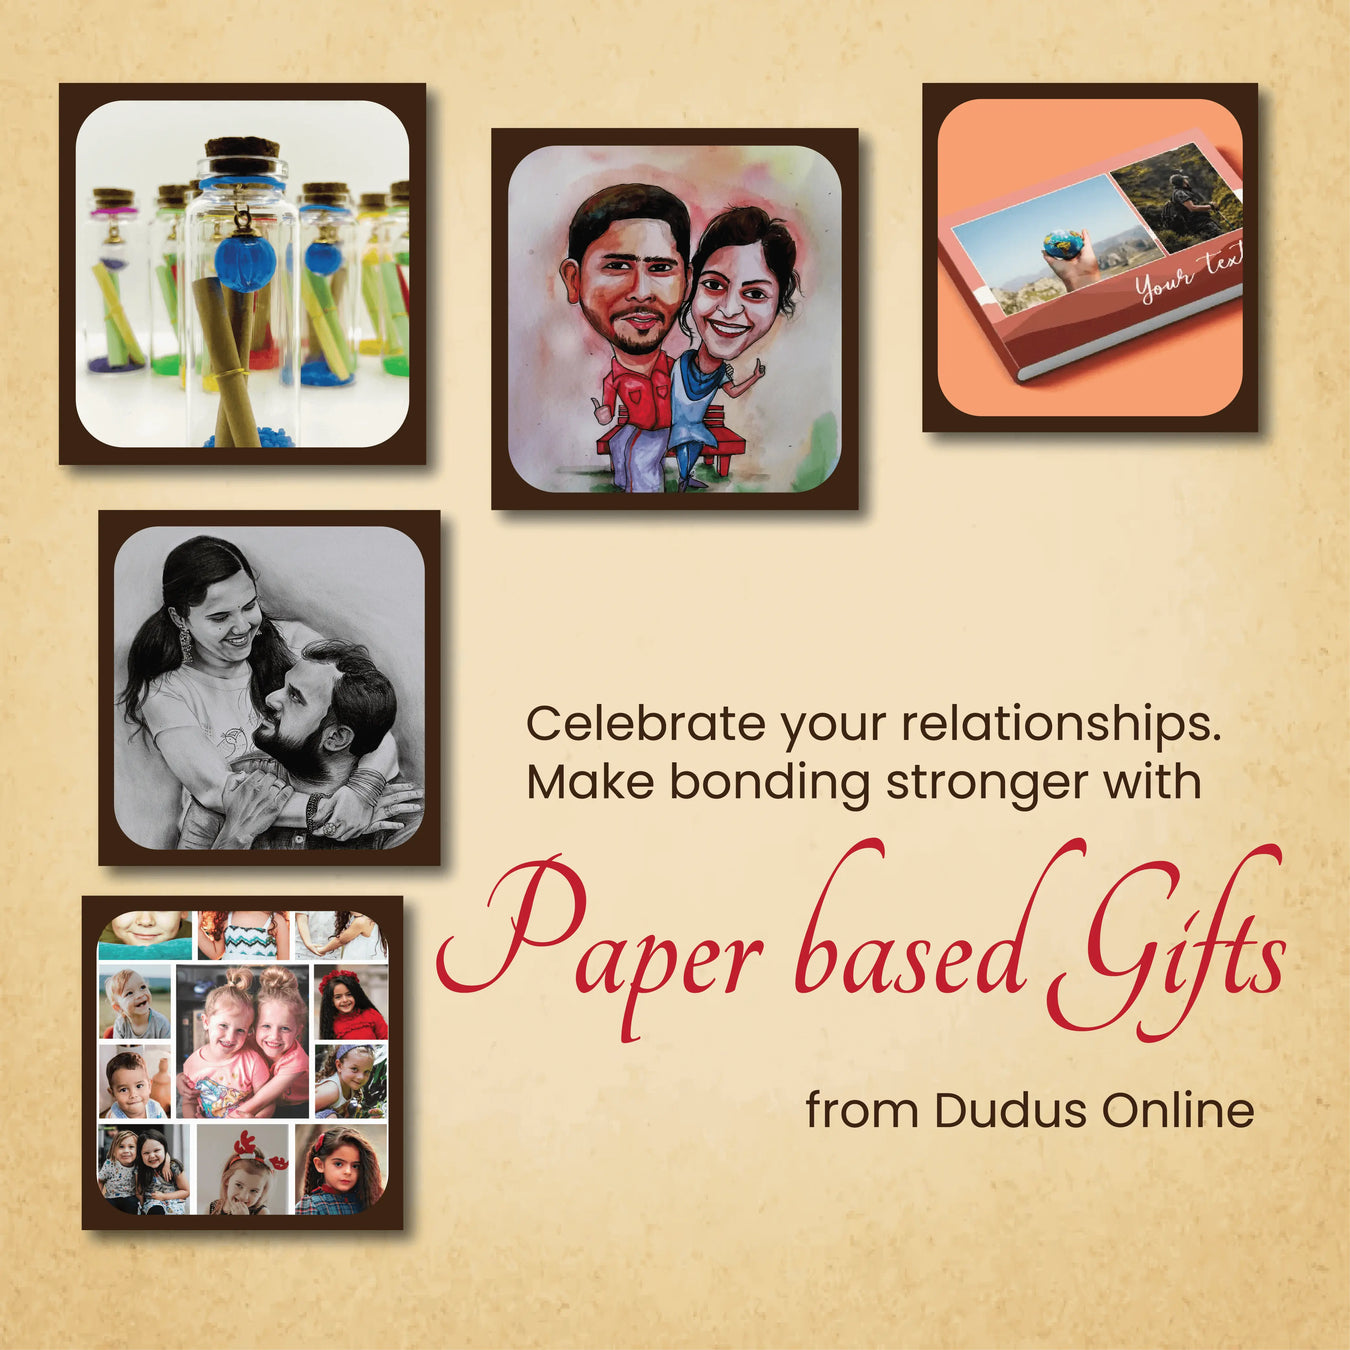 Shop paper based gifts from Dudus Online